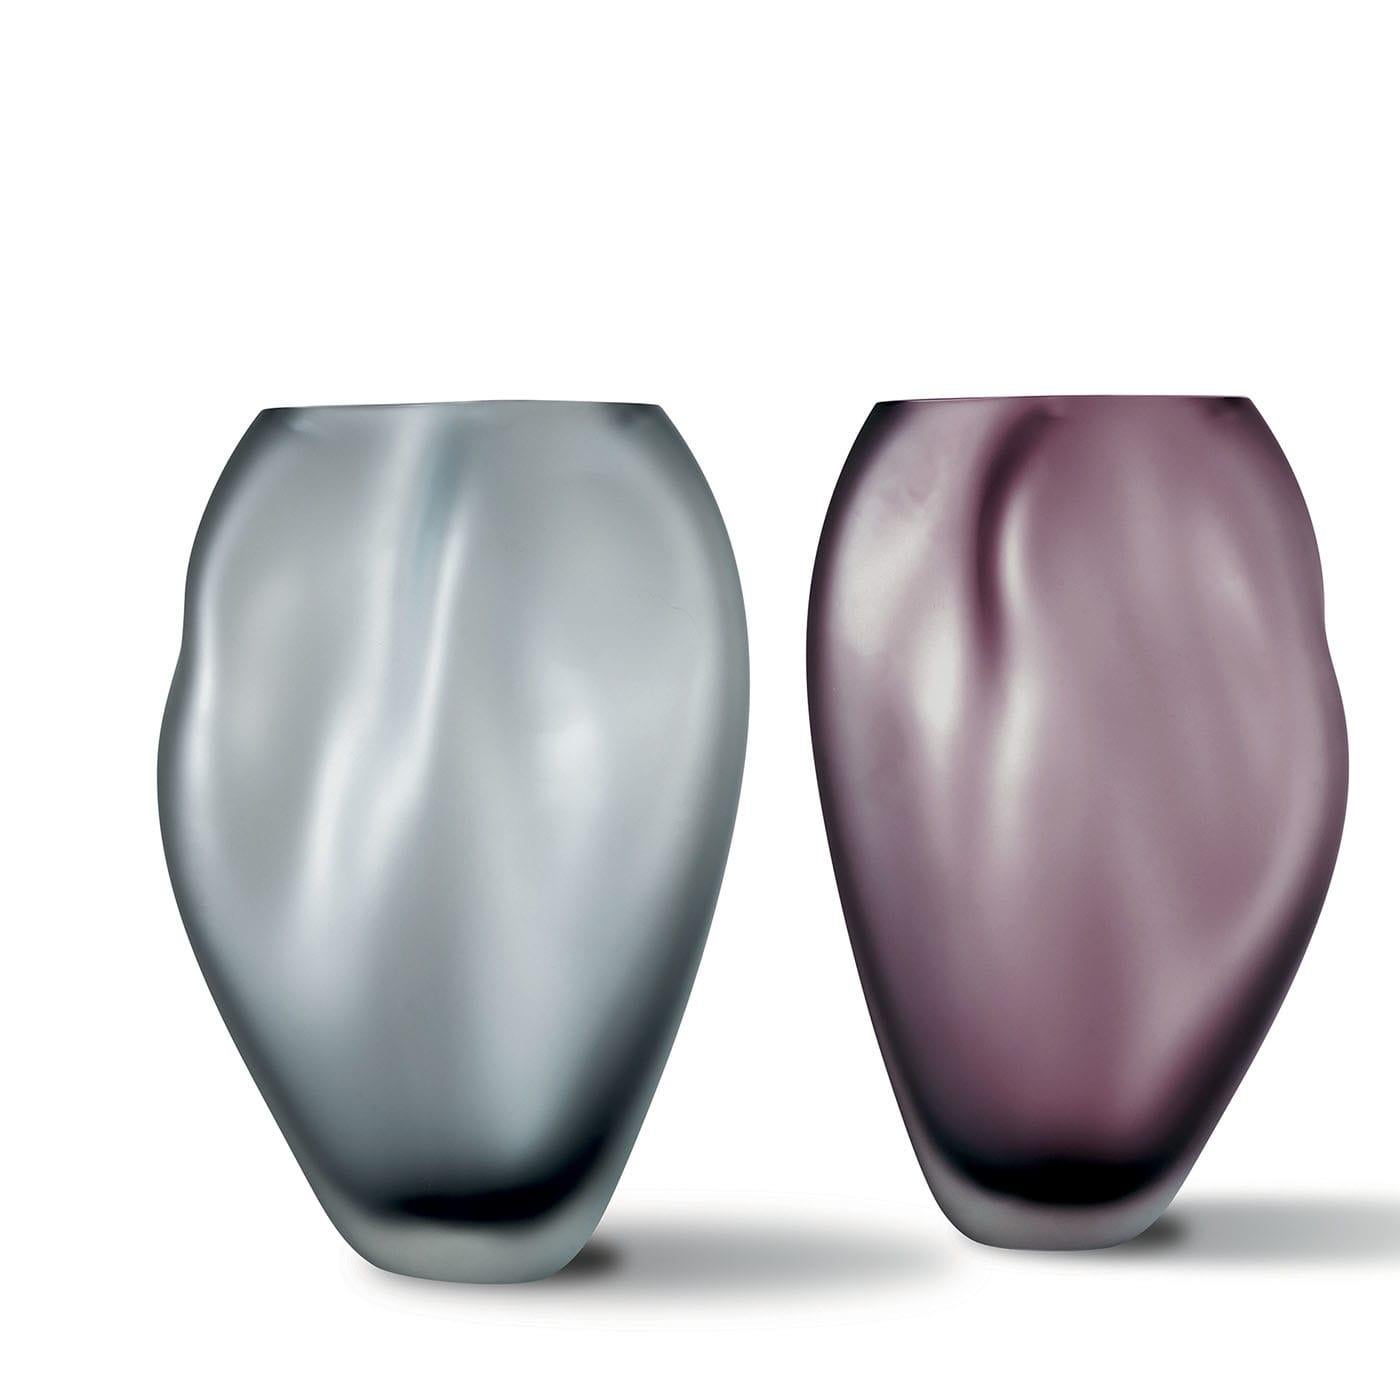 Inspired by water slightly rippled by the breeze, this gray-toned vase is a singular precious piece minutely mouth-blown by master craftsmen. Its distinctive, ethereal shape is obtained by heating the body up to almost losing control, an engaging